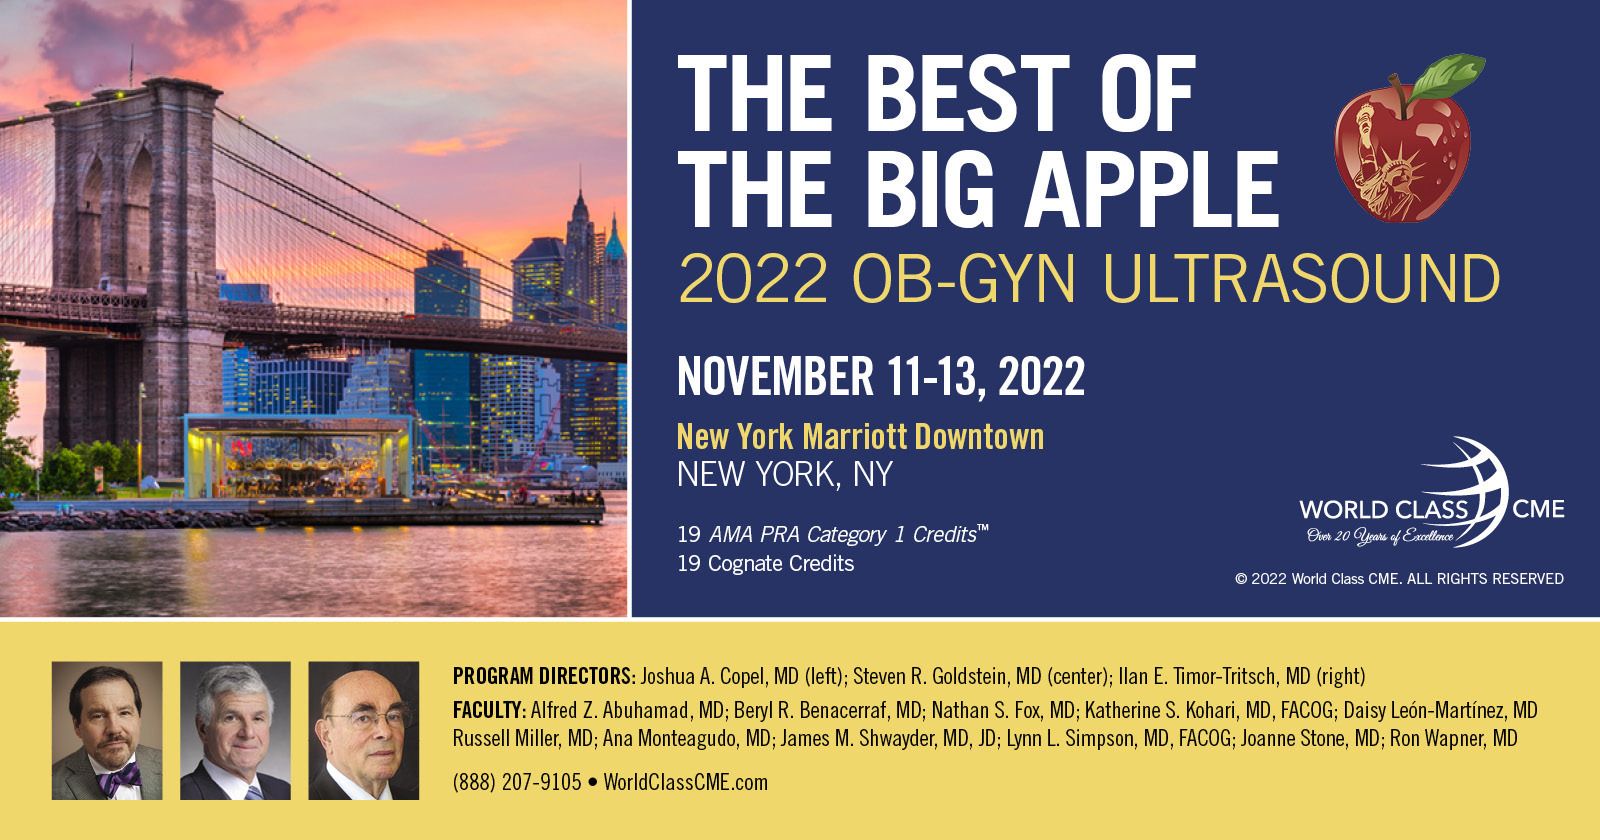 The Best of the Big Apple 2022 - OB-GYN Ultrasound